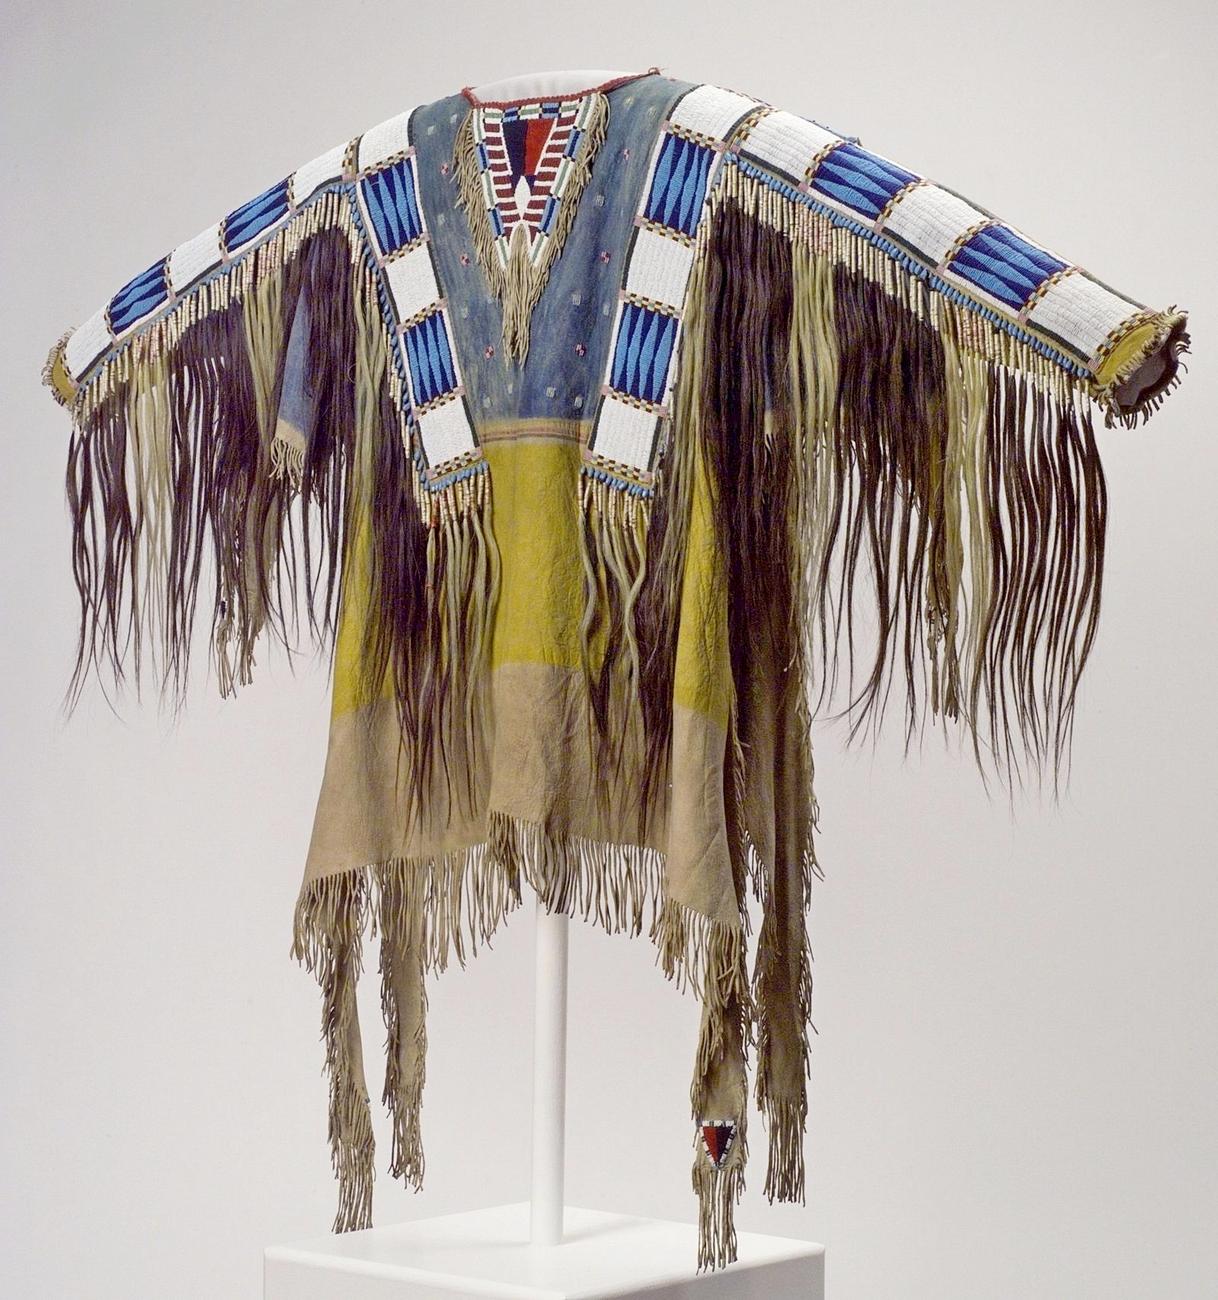 A war shirt that belonged to Oglala Sioux chief Red cloud. It is decorated with beaded strips and human hair scalp locks.